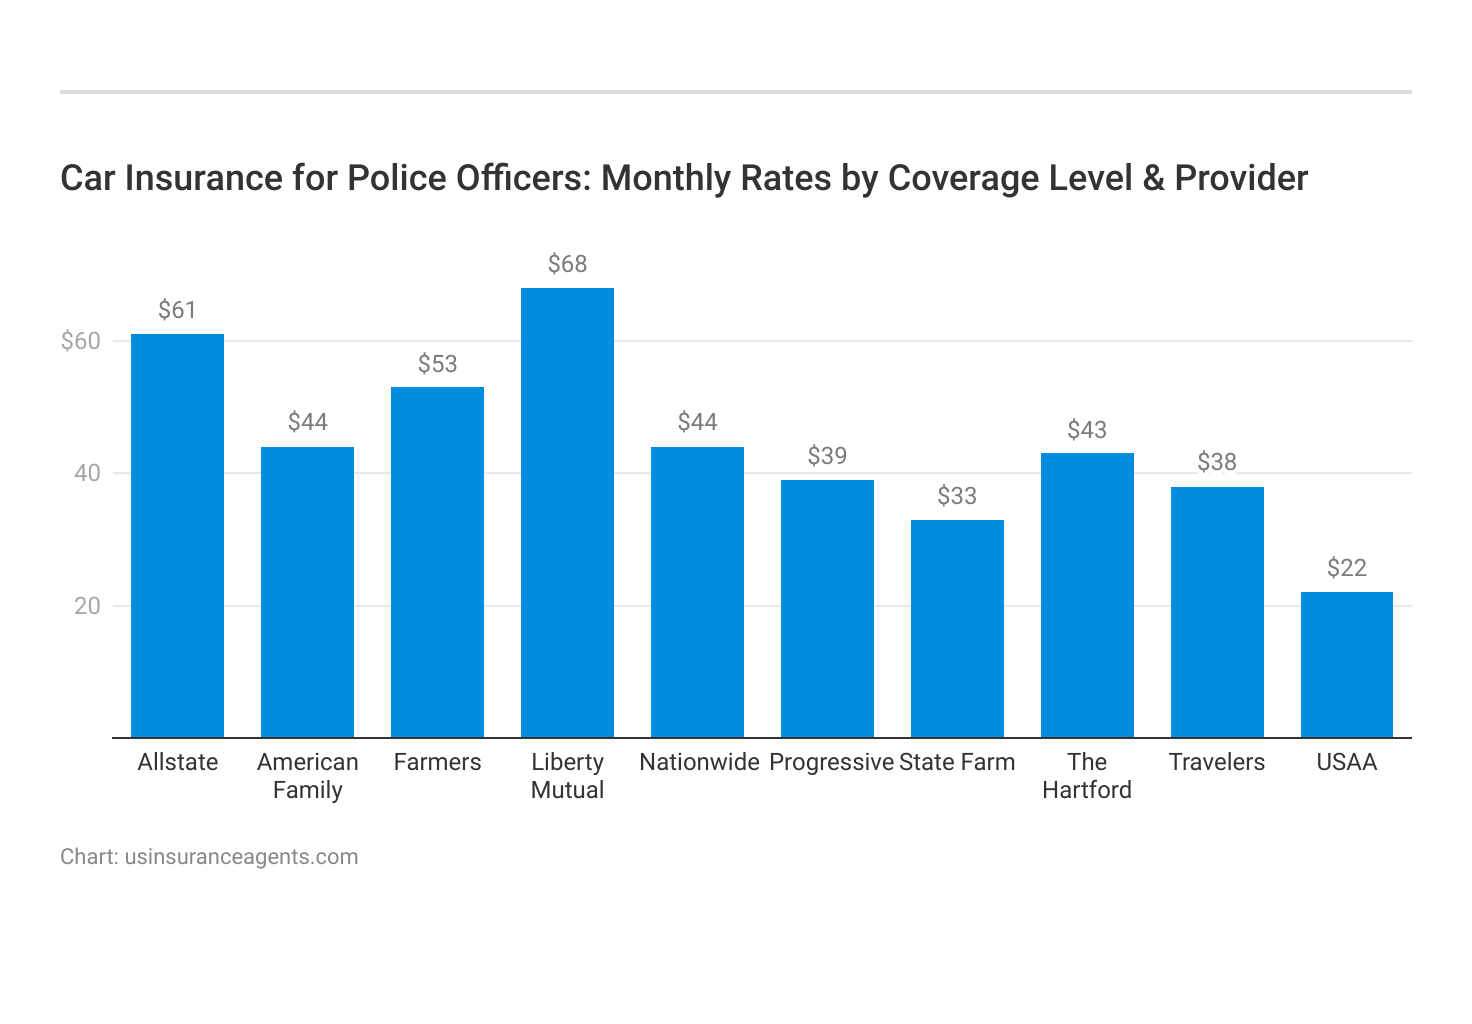 <h3>Car Insurance for Police Officers: Monthly Rates by Coverage Level & Provider</h3>